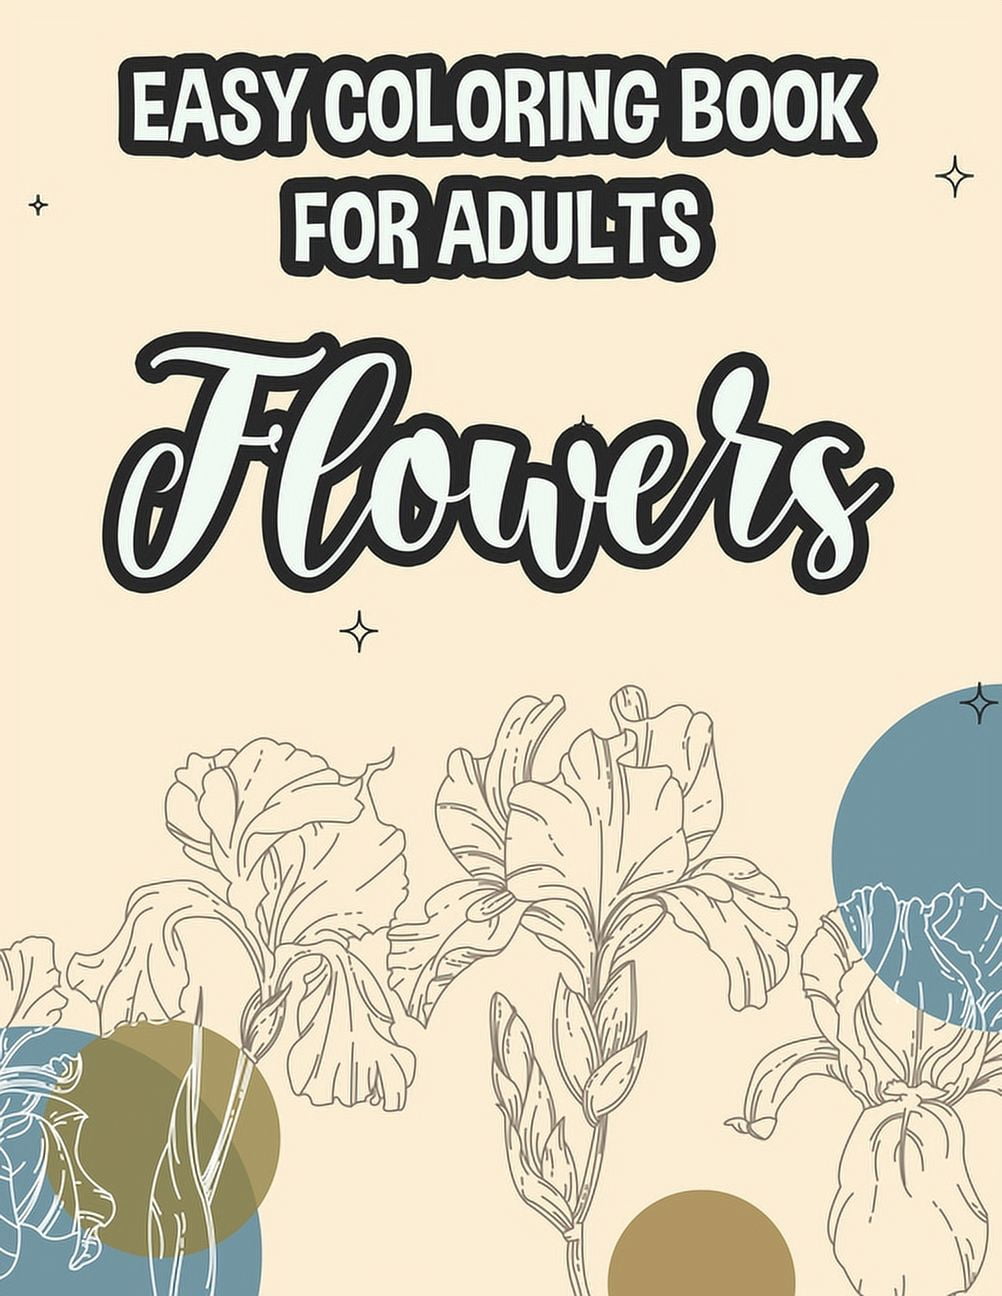 Easy Coloring Book For Adults Flowers: Calming Illustrations Of Flowers To Color, Coloring Sheets For Seniors With Simple Floral Designs [Book]